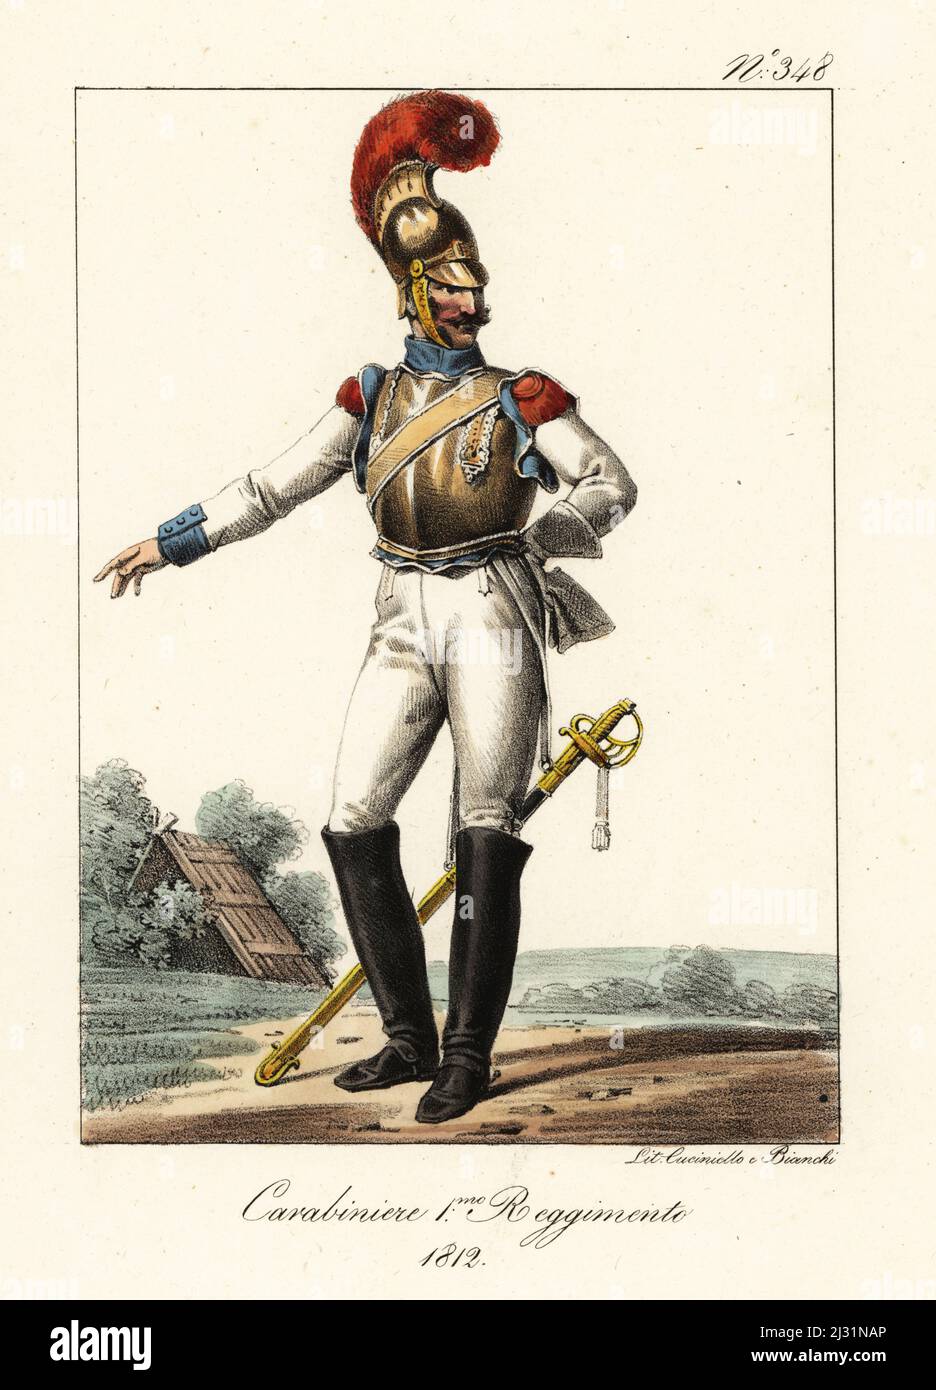 Uniform of the 1st Regiment of Carabiniers-a-Cheval. He wears a copper dragoon's helmet with scarlet chenille, brass breastplate, white uniform, scarlet epaulettes, blue cuffs, boots, and sabre. Carabinier 1er Regiment, 1812. Handcoloured lithograph by Lorenzo Bianchi and Domenico Cuciniello after Hippolyte Lecomte from Costumi civili e militari della monarchia francese dal 1200 al 1820, Naples, 1825. Italian edition of Lecomte’s Civilian and military costumes of the French monarchy from 1200 to 1820. Stock Photo